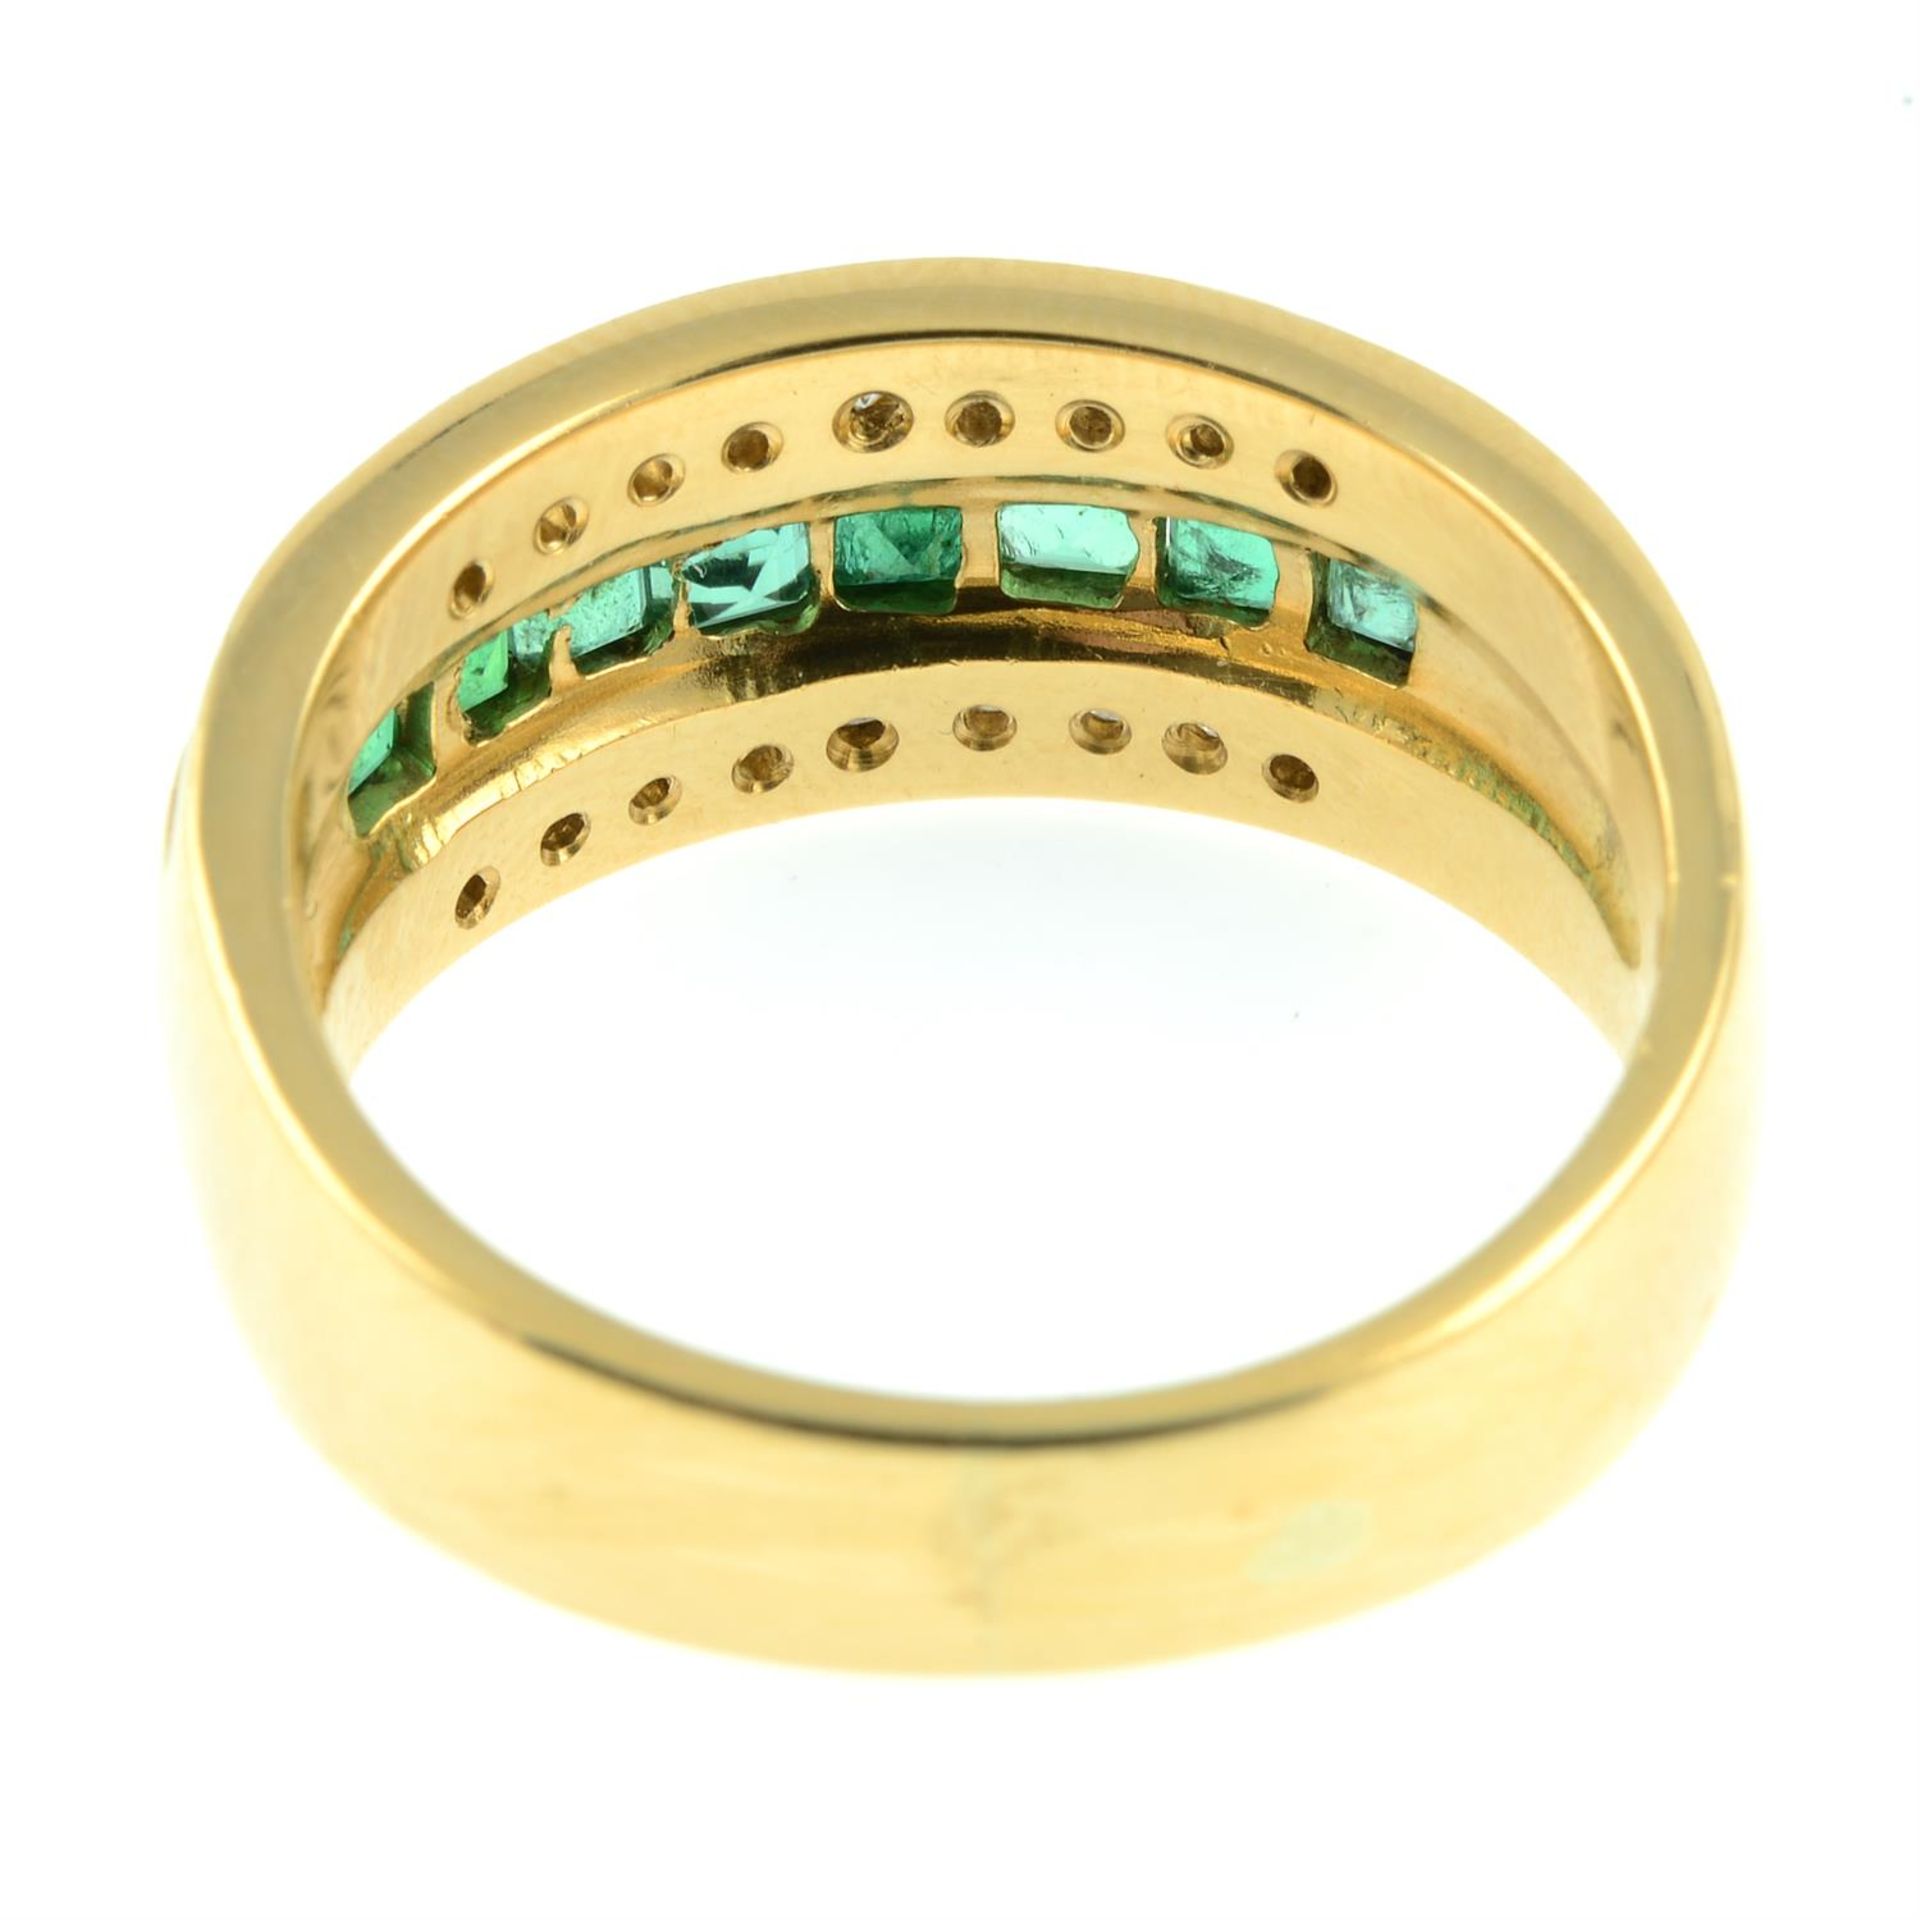 An 18ct gold brilliant-cut diamond and emerald three-row band ring. - Image 4 of 5